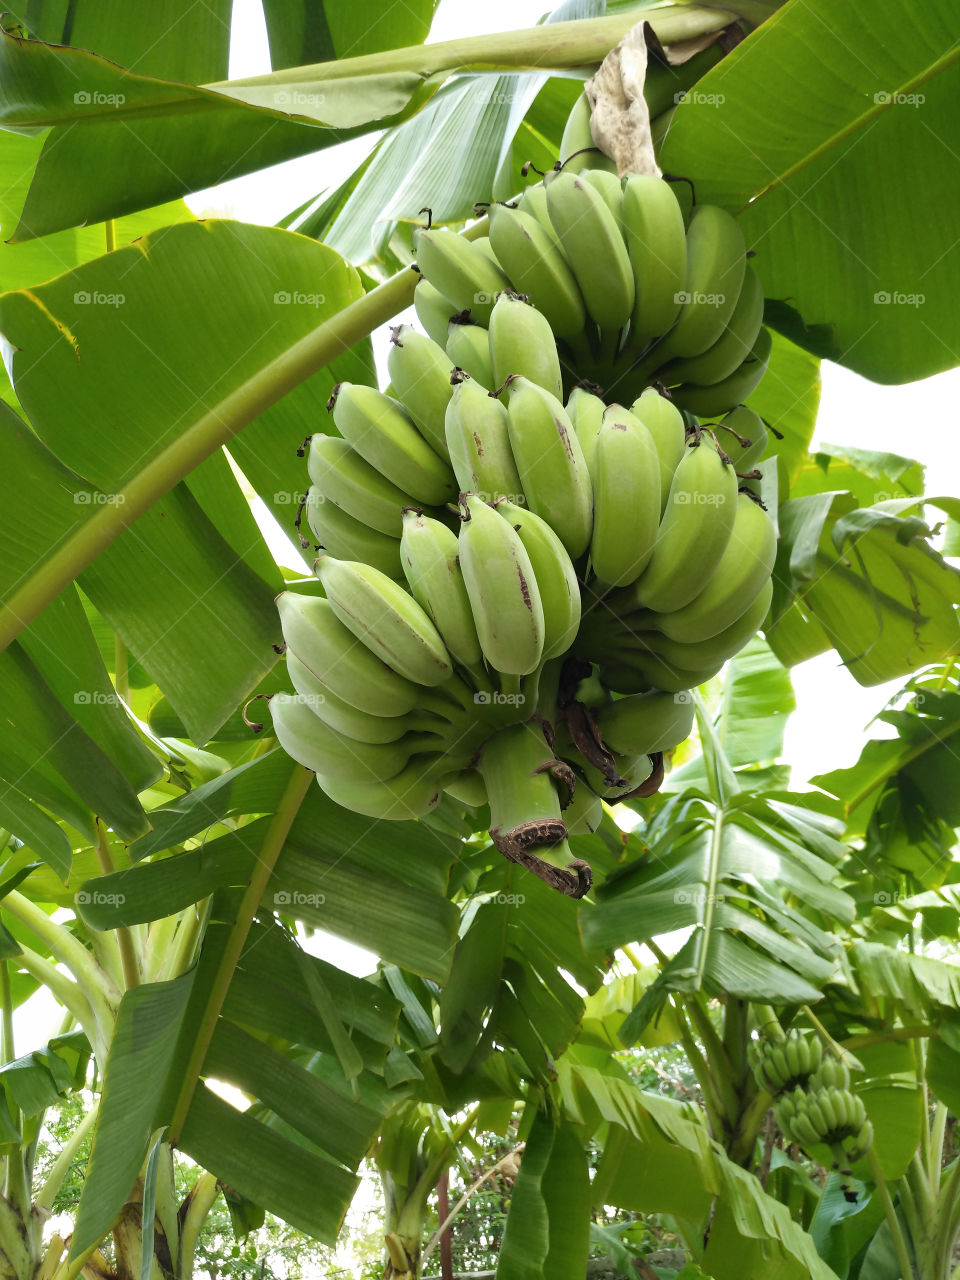 Green raw of Cultivated banana.